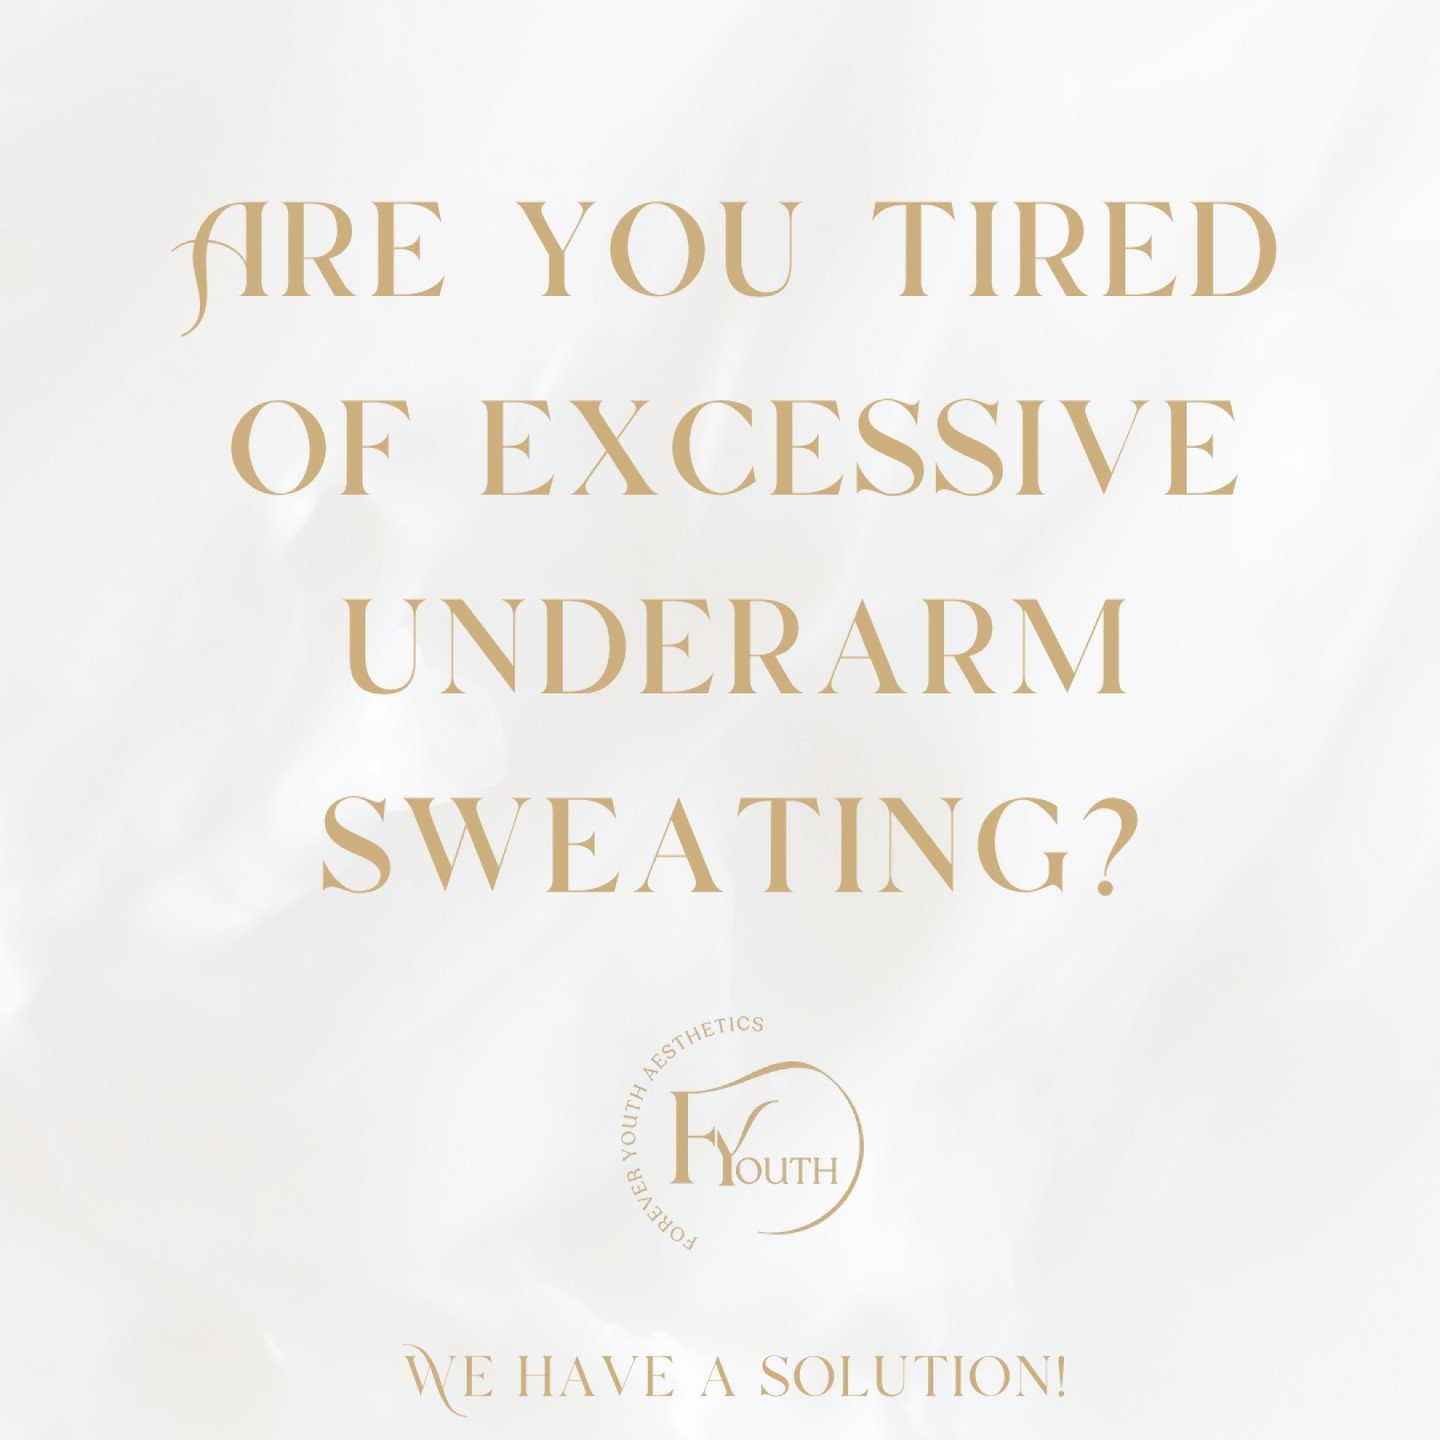 Are you tired of excessive underarm sweating? 

We have a solution! 

💉 Botox injections target the glands responsible for sweat and odor, giving you relief for 9-12 months. 

Say goodbye to discomfort and hello to confidence!

Explore our full rang